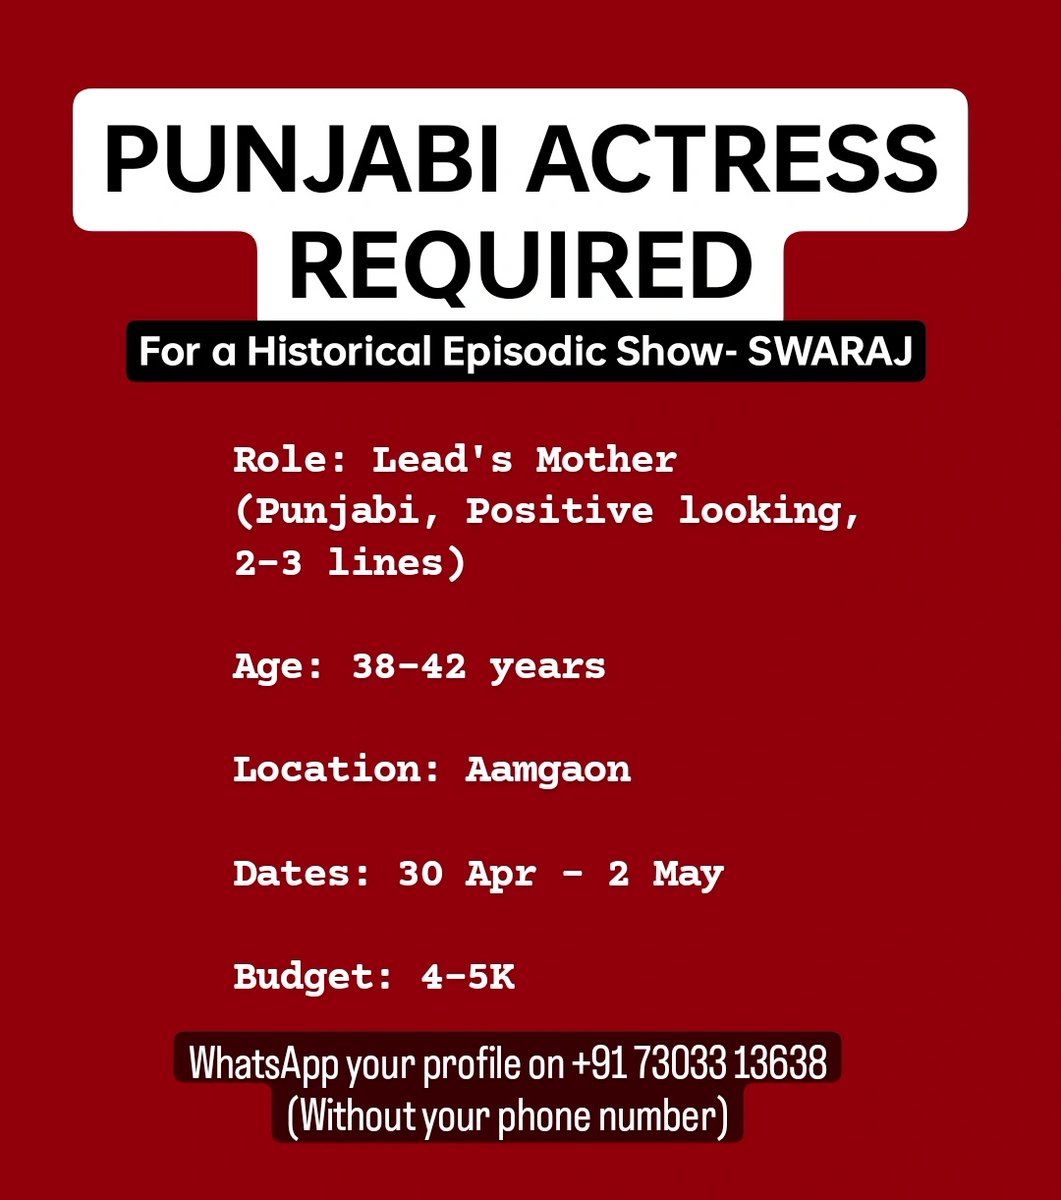 #punjabiactress required for a #ddnational show- SWARAJ

Location #aamgaon

To Apply, send your profiles on +91 73033 13638

#tvshowaudition #actor #punjabindustry #punjabiactor #castingcallmumbai #castingcall #audition #auditionupdates #actingaudition #acting #CASTING #firstcut